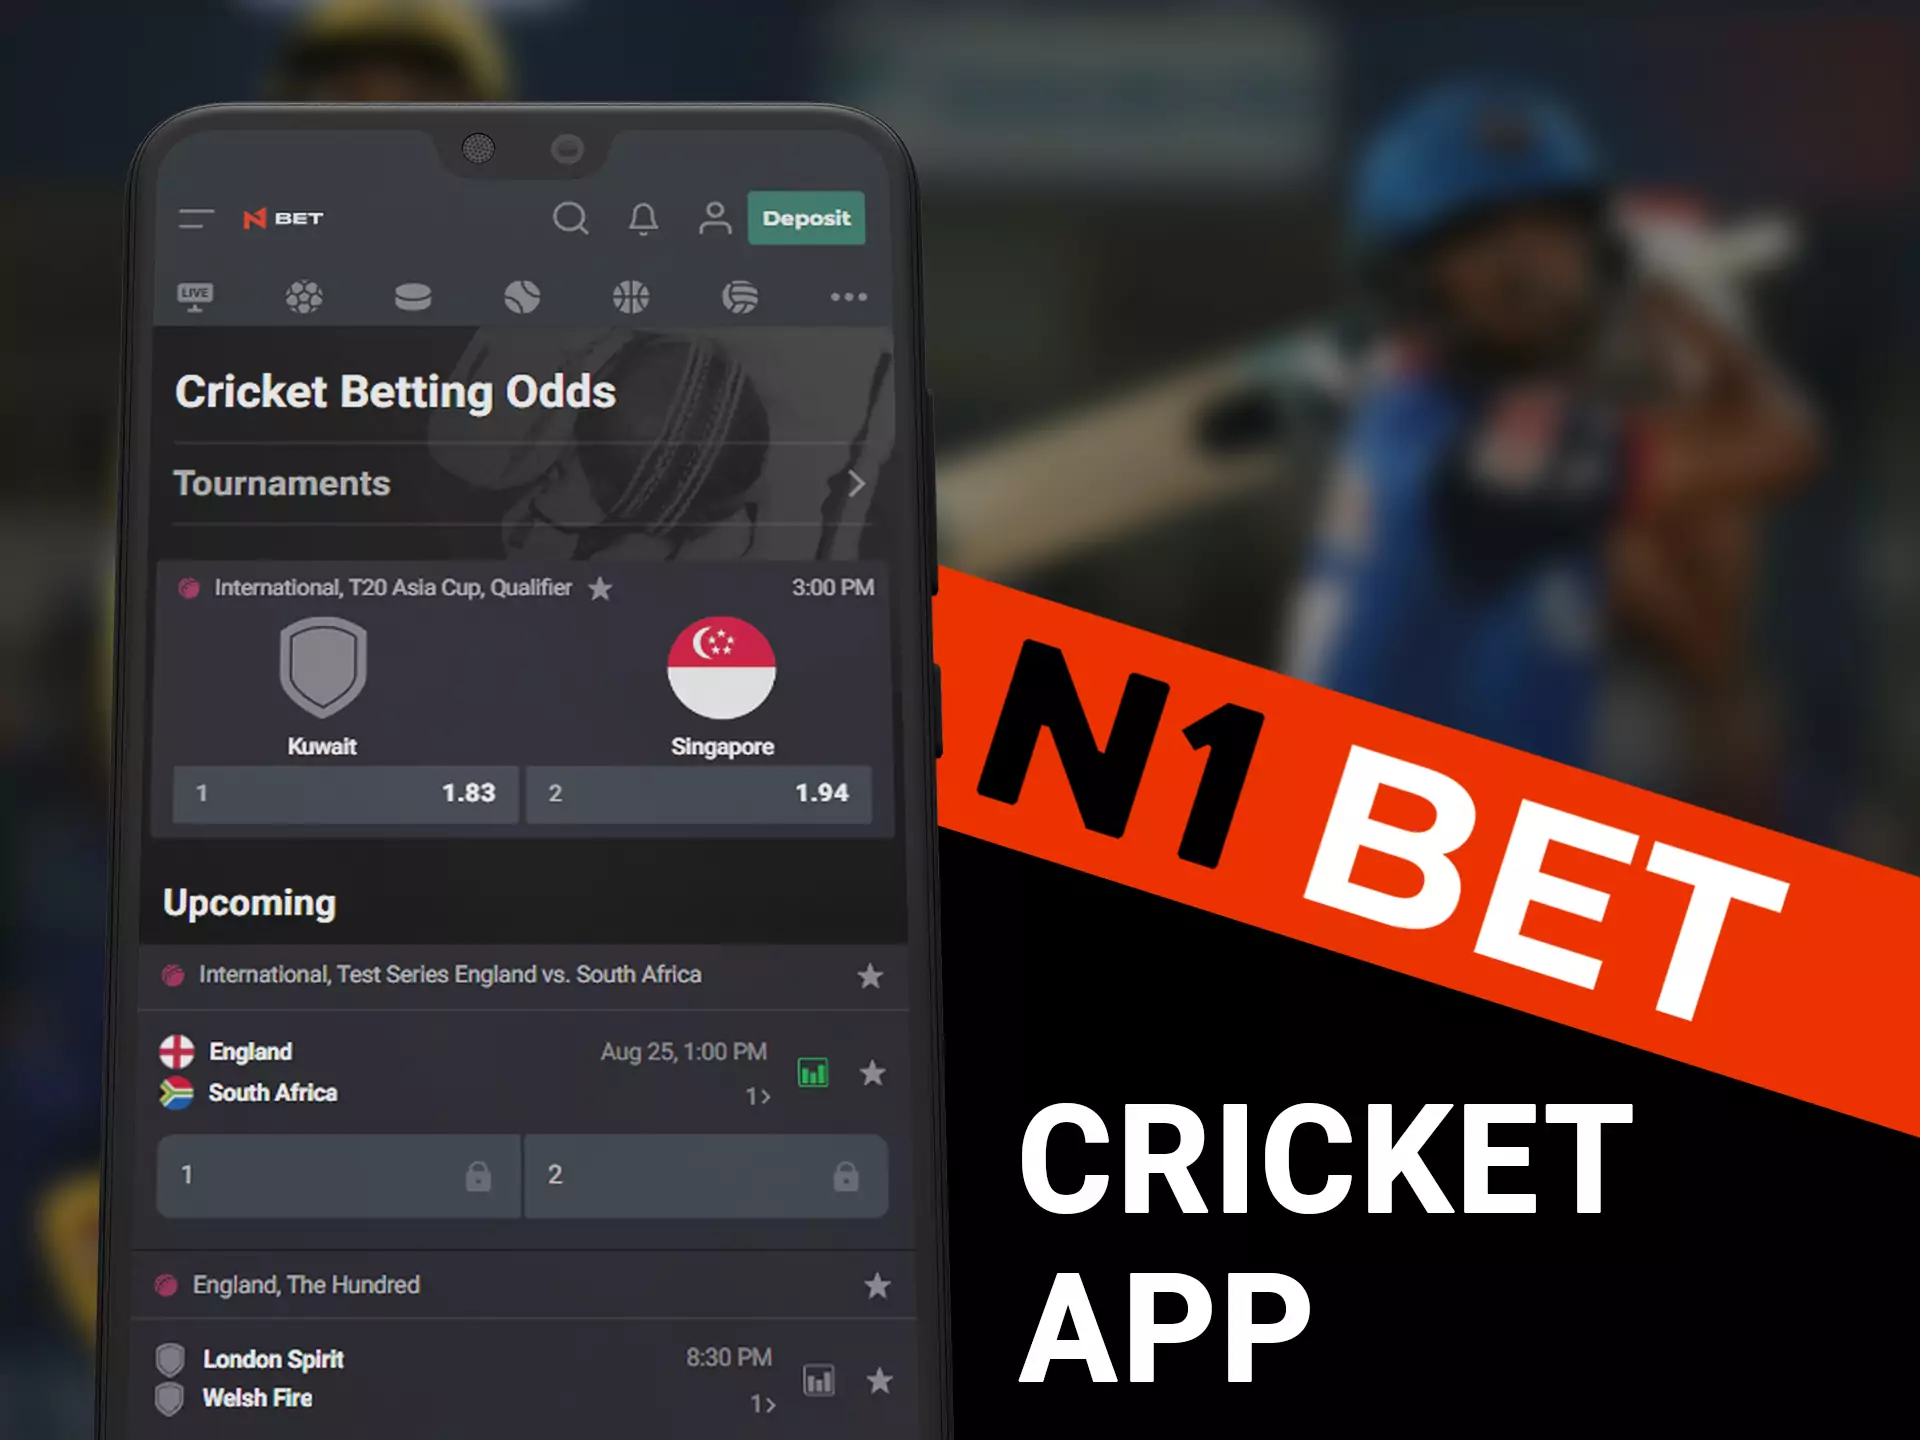 Watch cricket tournaments and bet on individual matches using the N1Bt app.